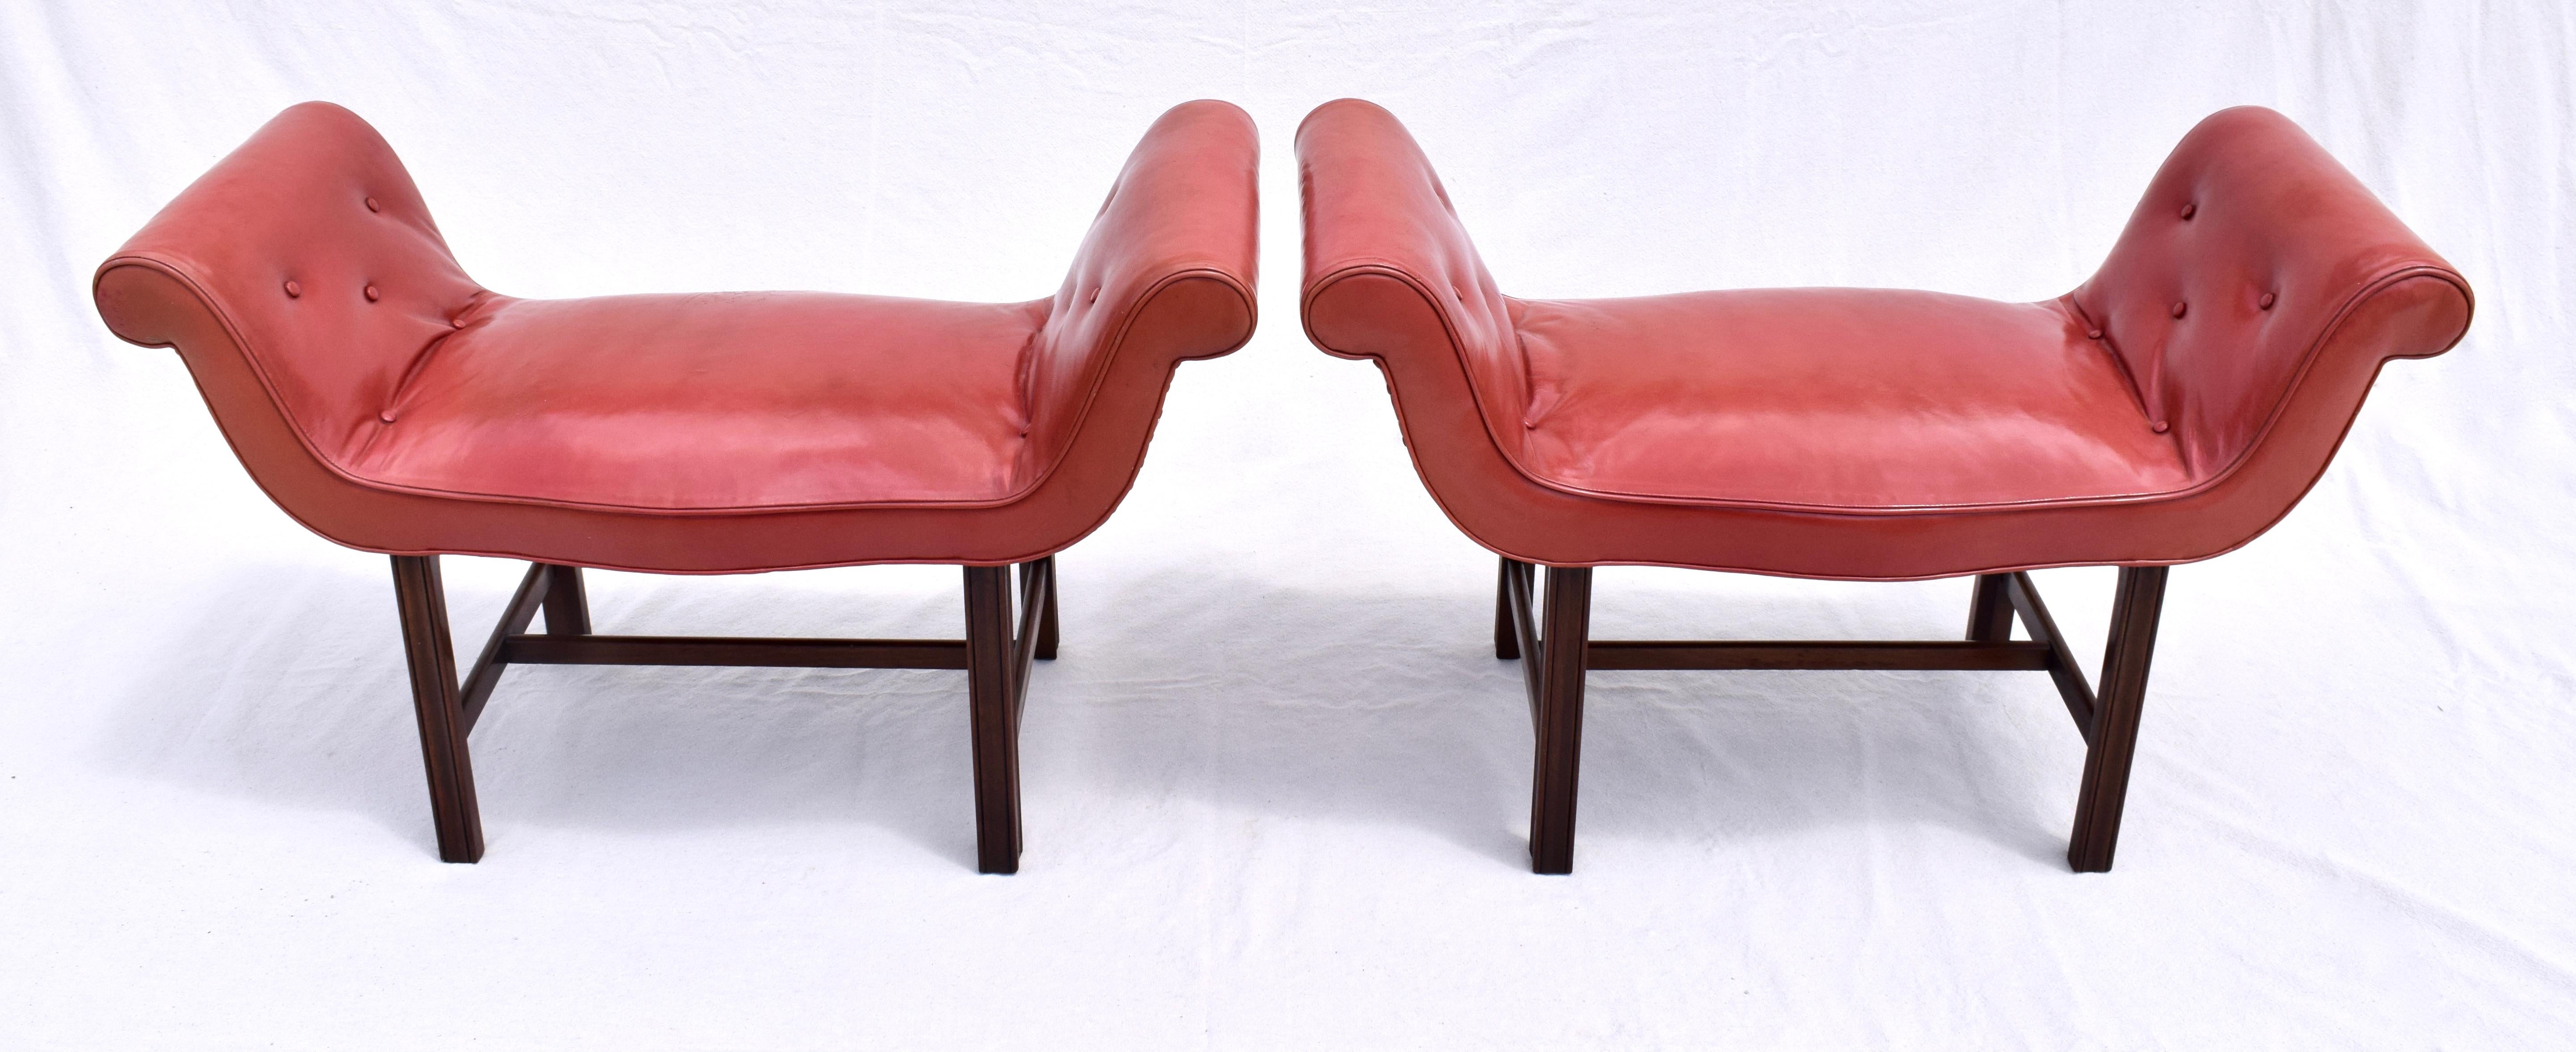 Exceptional pair of English saddle style mahogany H stretcher base Chippendale window benches with flanking scrolled arms in original Salmon leather upholstery & leather capped tacks surround. Early 20th century.